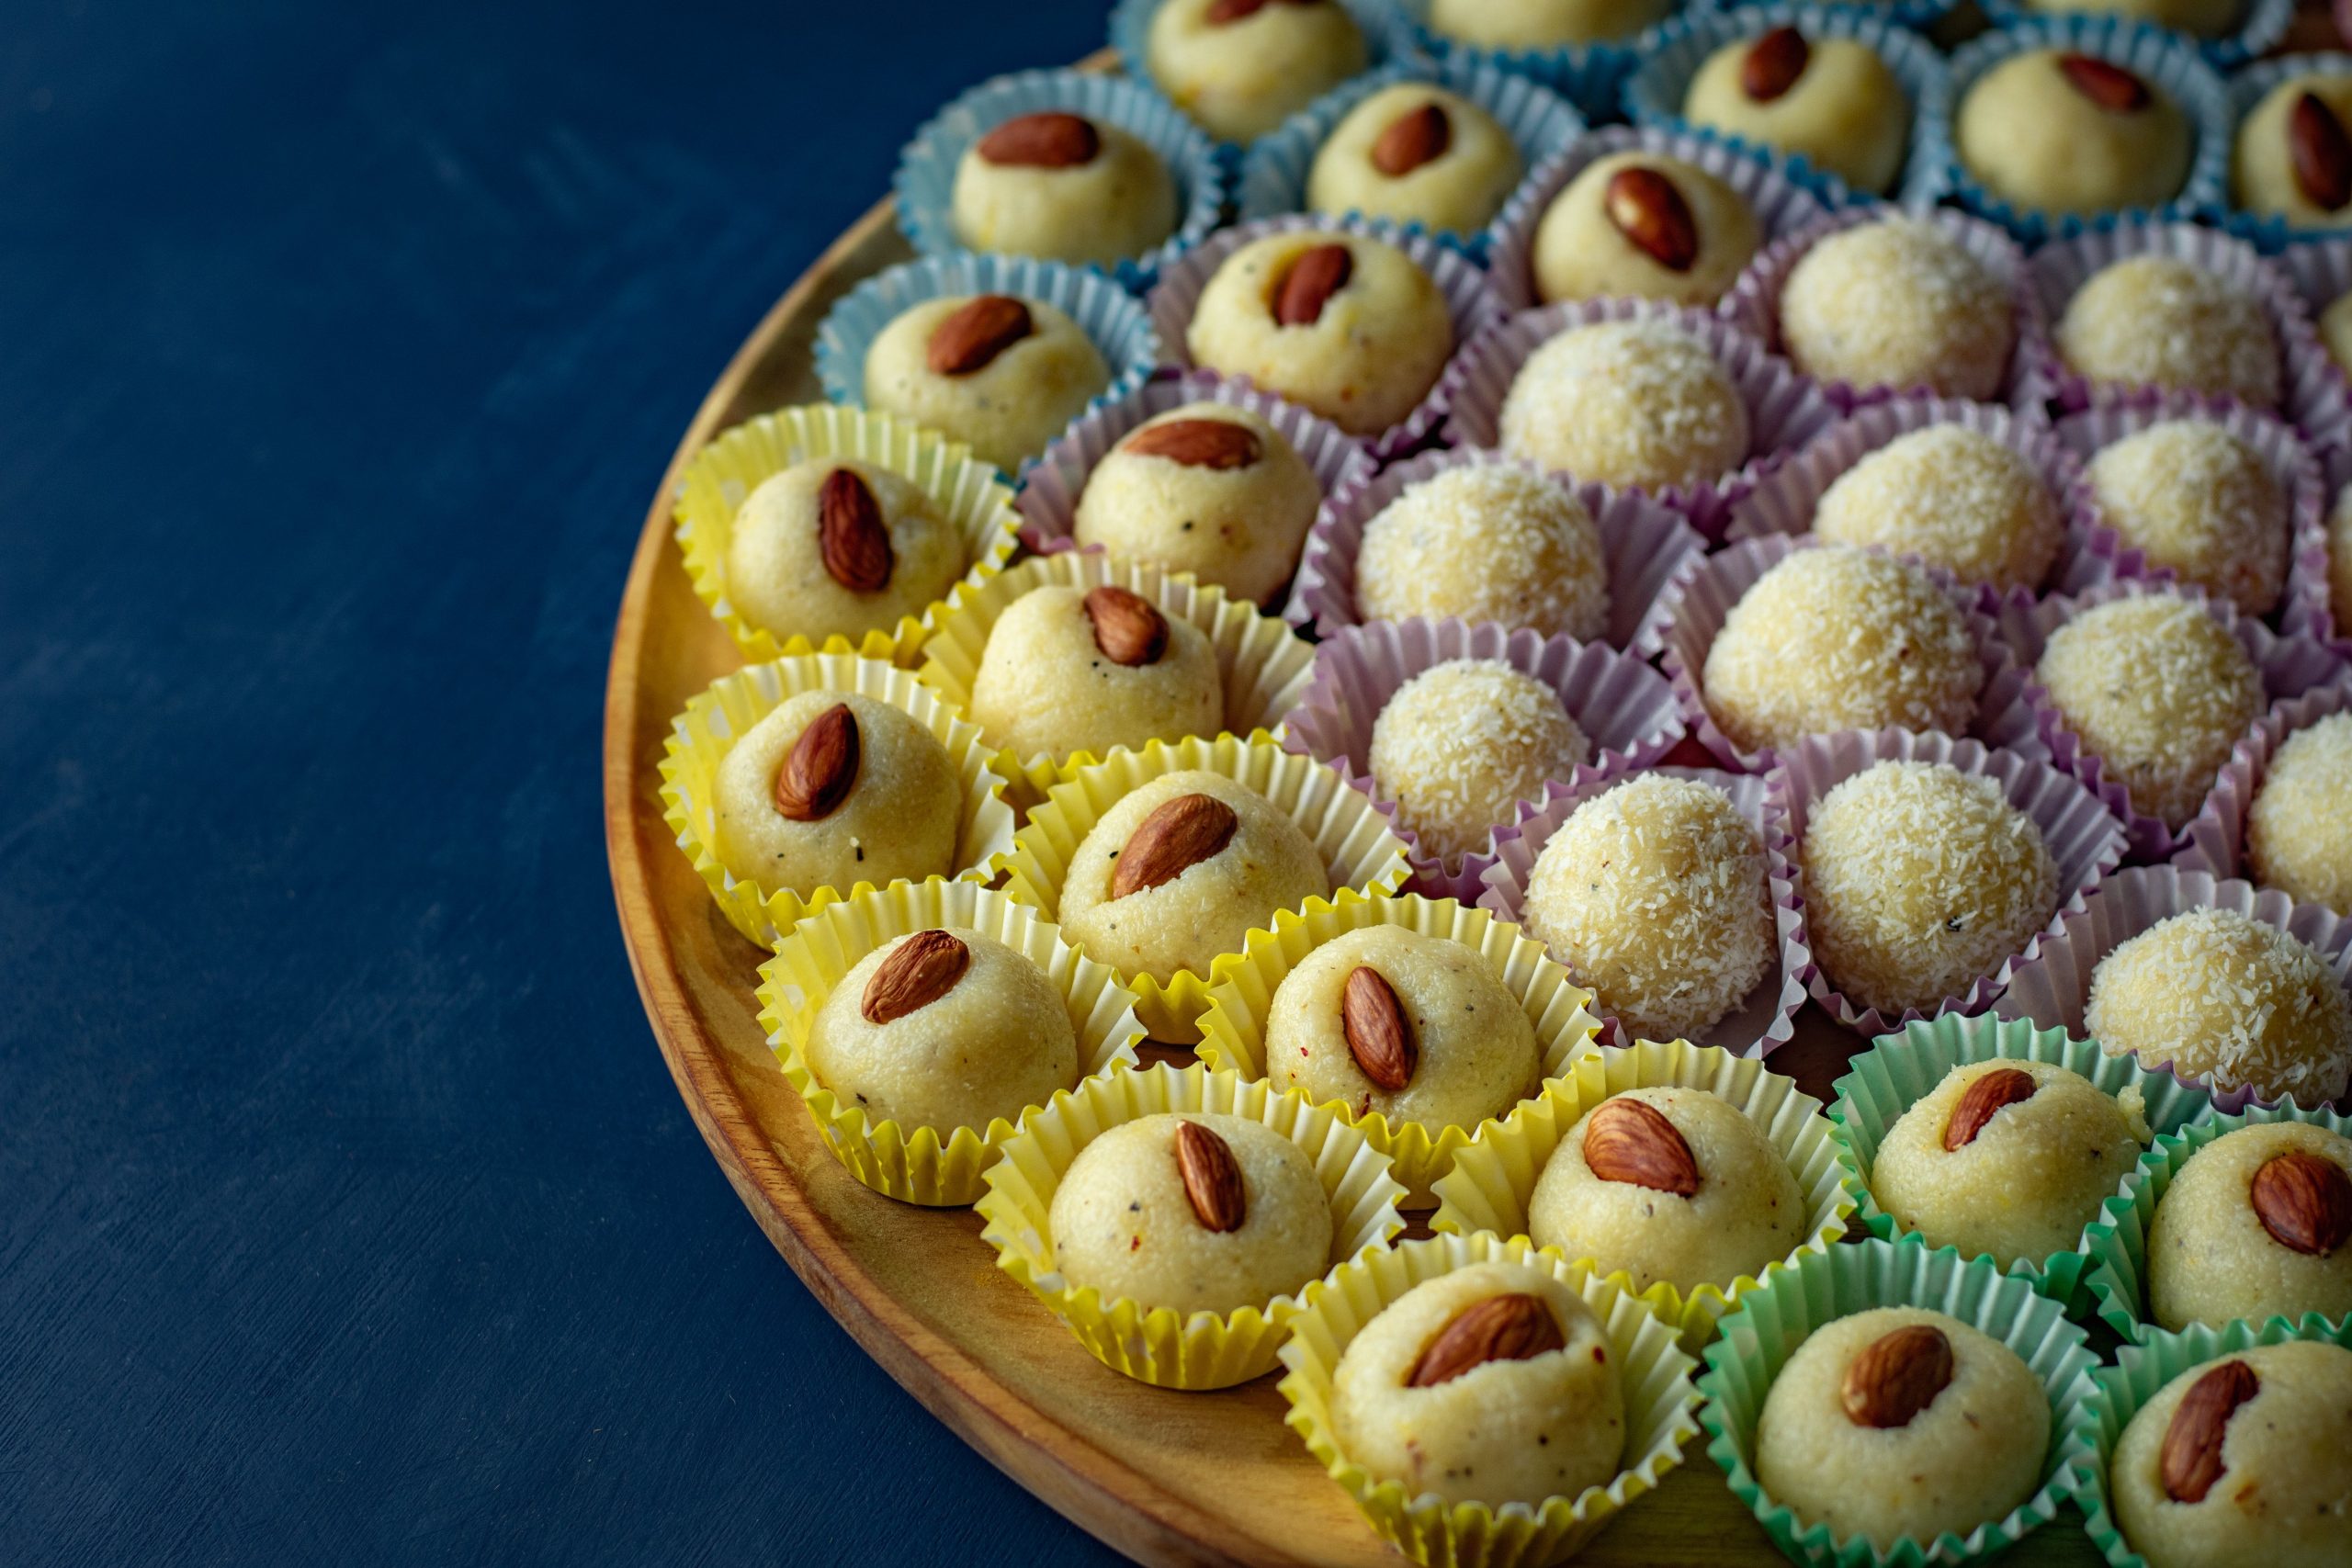 Easy sweets recipes you must try this Janmashtami